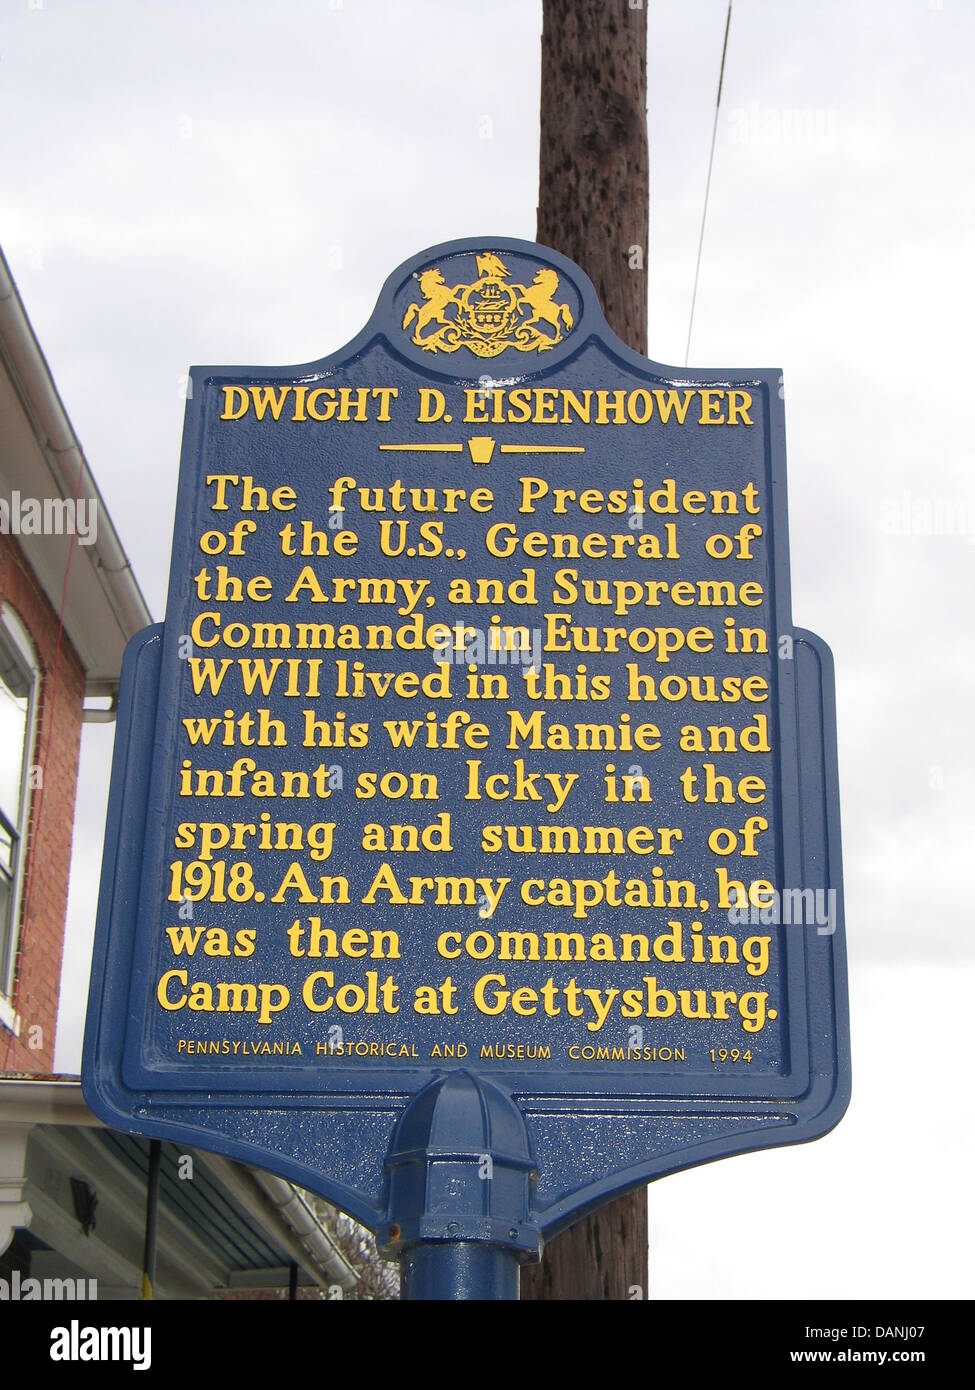 DWIGHT D. EISENHOWER The future President of the U.S., General of the Army, and Supreme Commander in Europe in WWII lived in this house with his wife Mamie and infant son Icky in the spring and summer of 1918. An Army captain, he was then commanding Camp Colt at Gettysburg. Pennsylvania Historical and Museum Commission, 1994 Stock Photo